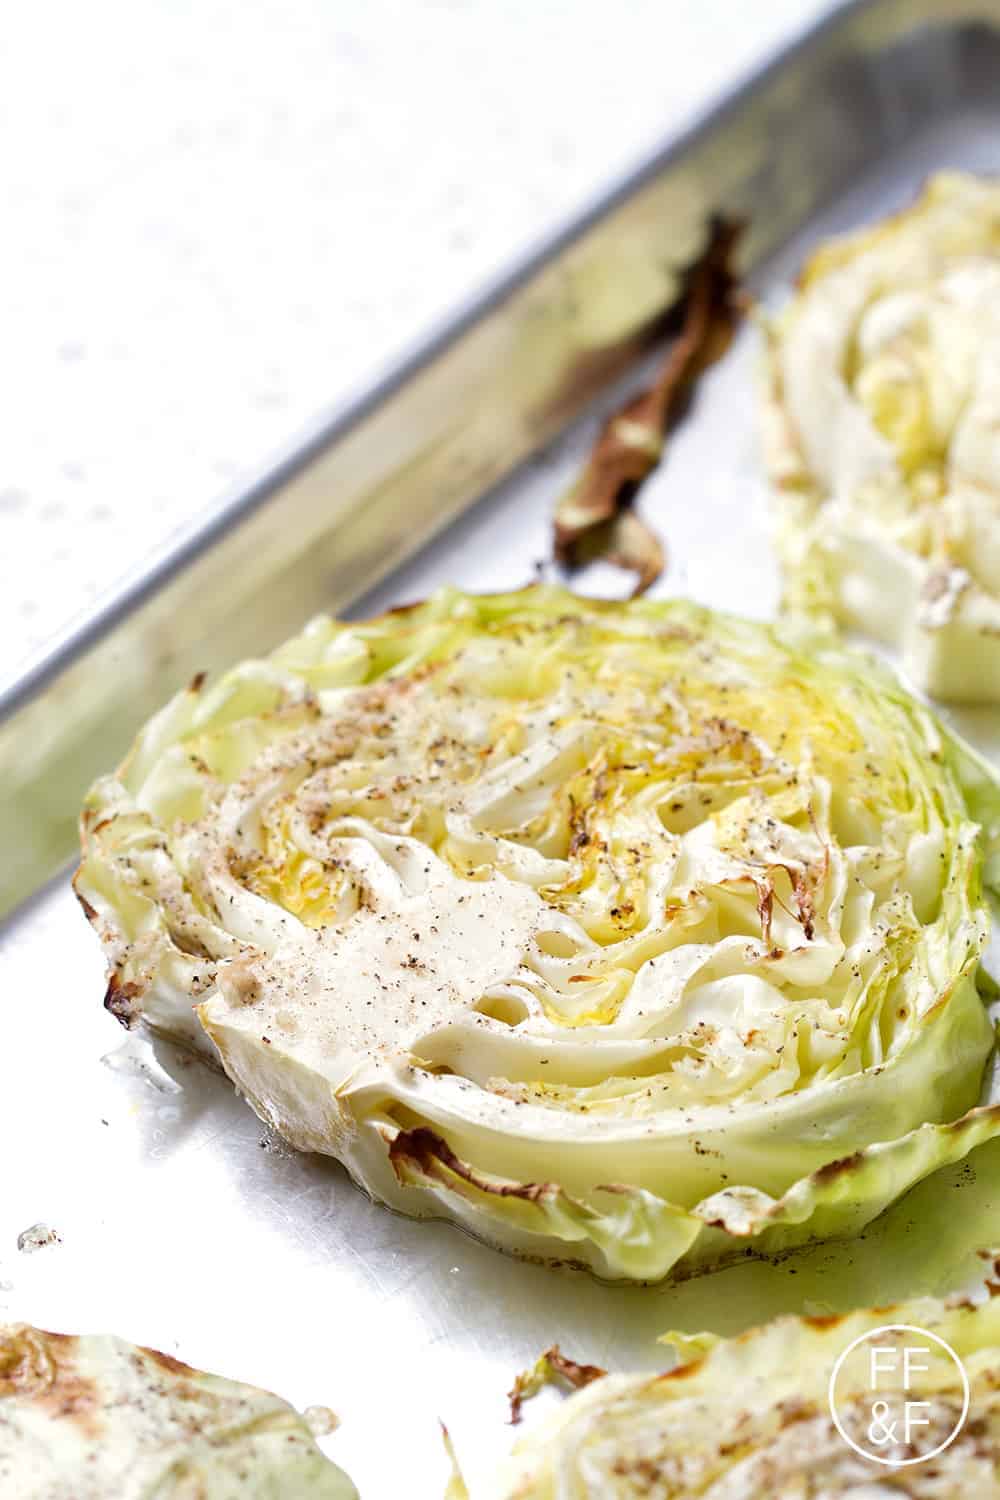 This 4-ingredient Oven Roasted Cabbage that is a delicious and easy as a side to corned beef or steak. This recipe is allergy friendly (gluten, dairy, shellfish, nut, egg, and soy free) and suits the autoimmune protocol, paleo and vegan diets.